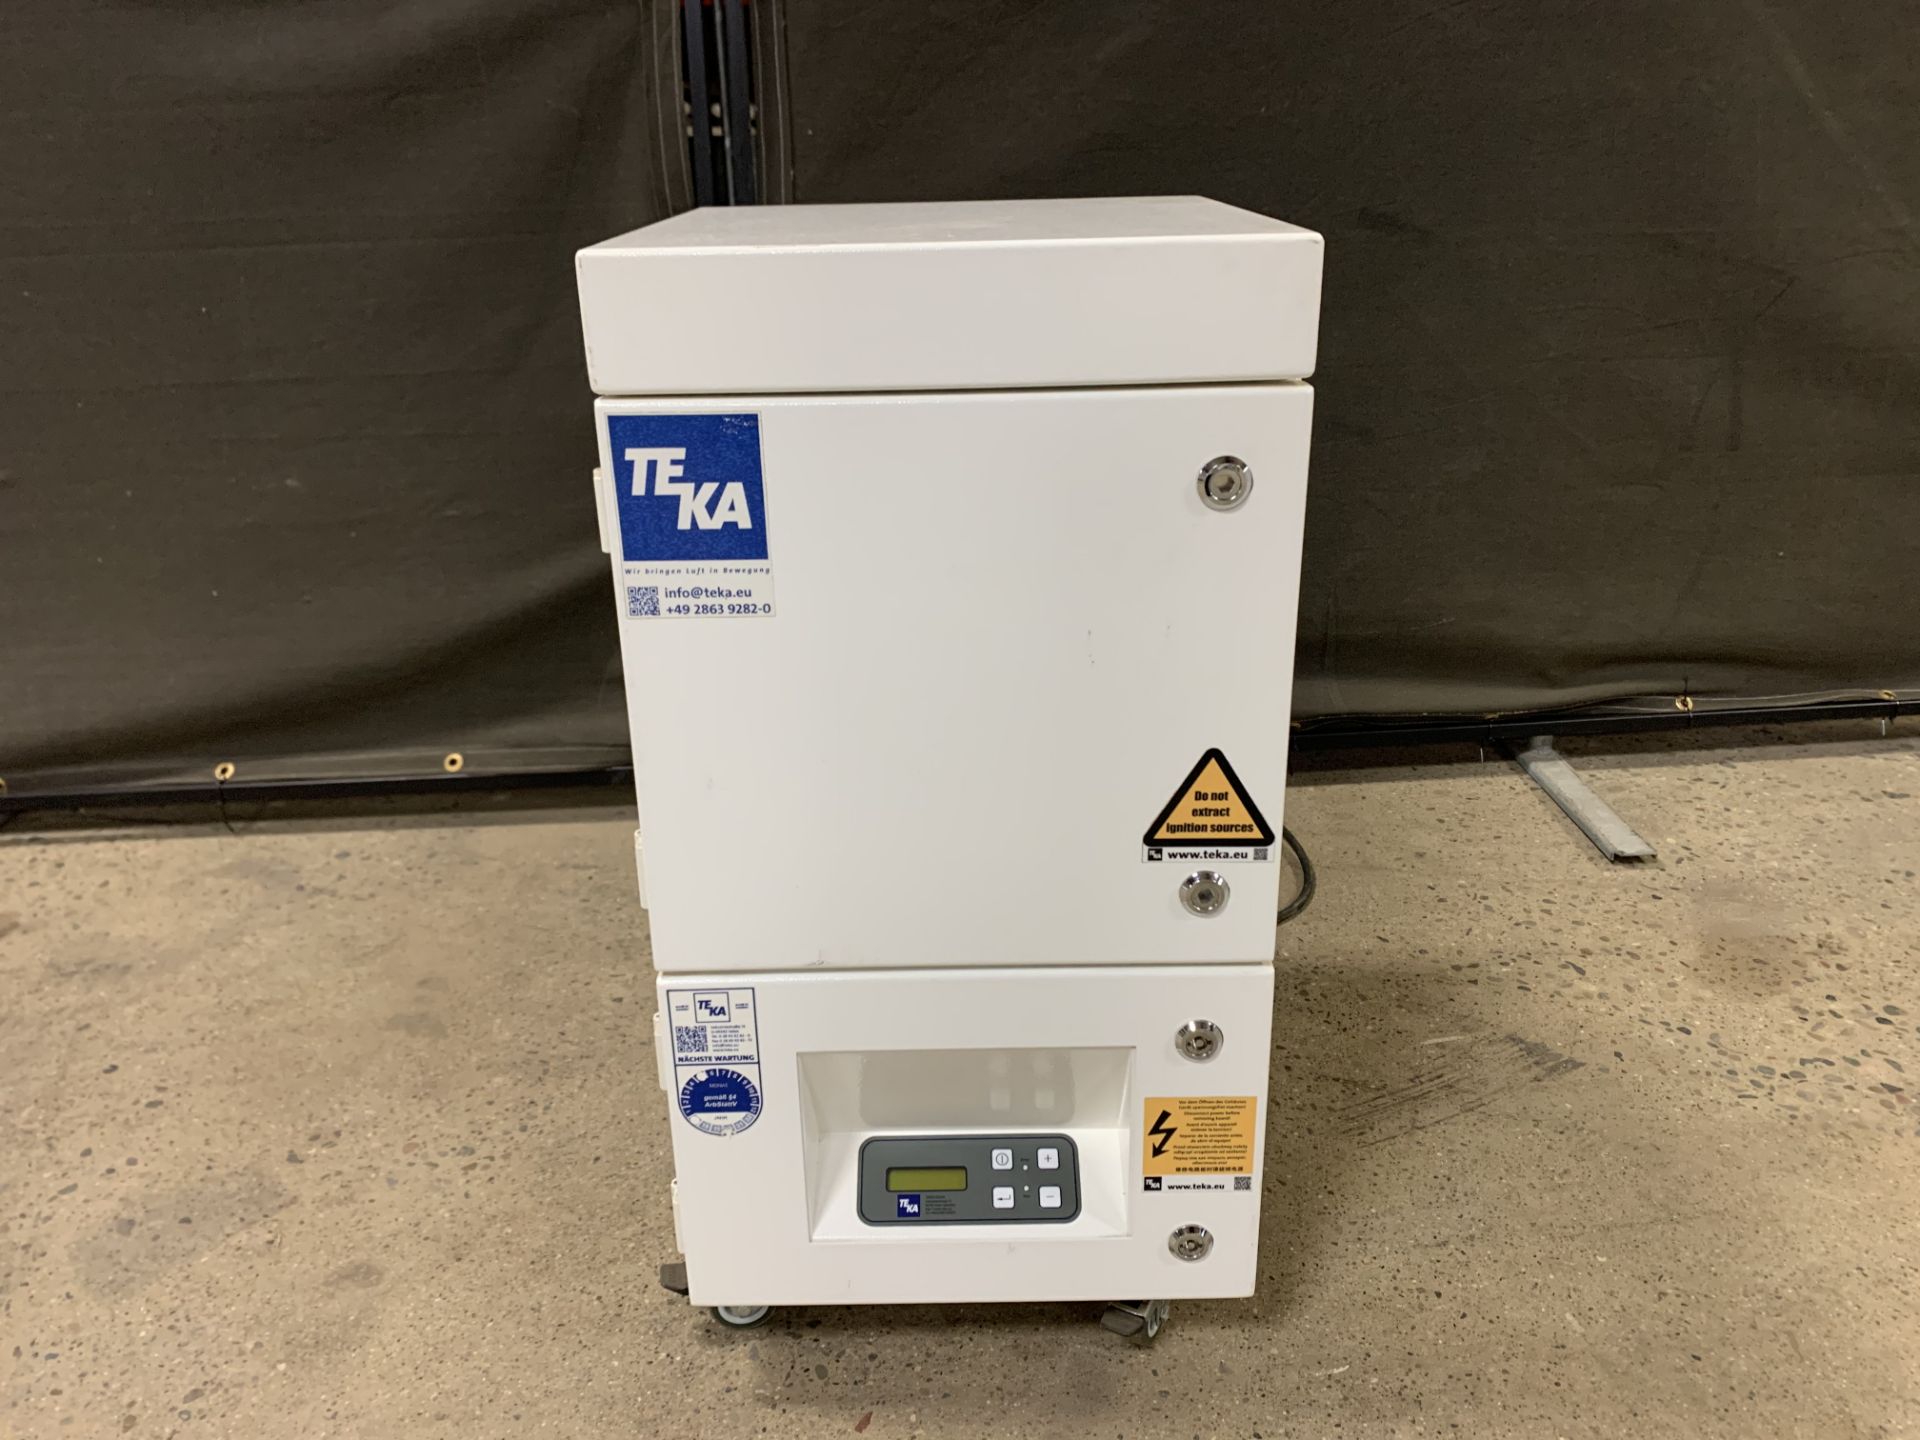 UNUSED - TEKA LMD 508 PORTABLE FUME/PARTICLE EXTRACTOR, EURO POWER CORD (EASY CONVERT TO 115V/240v)